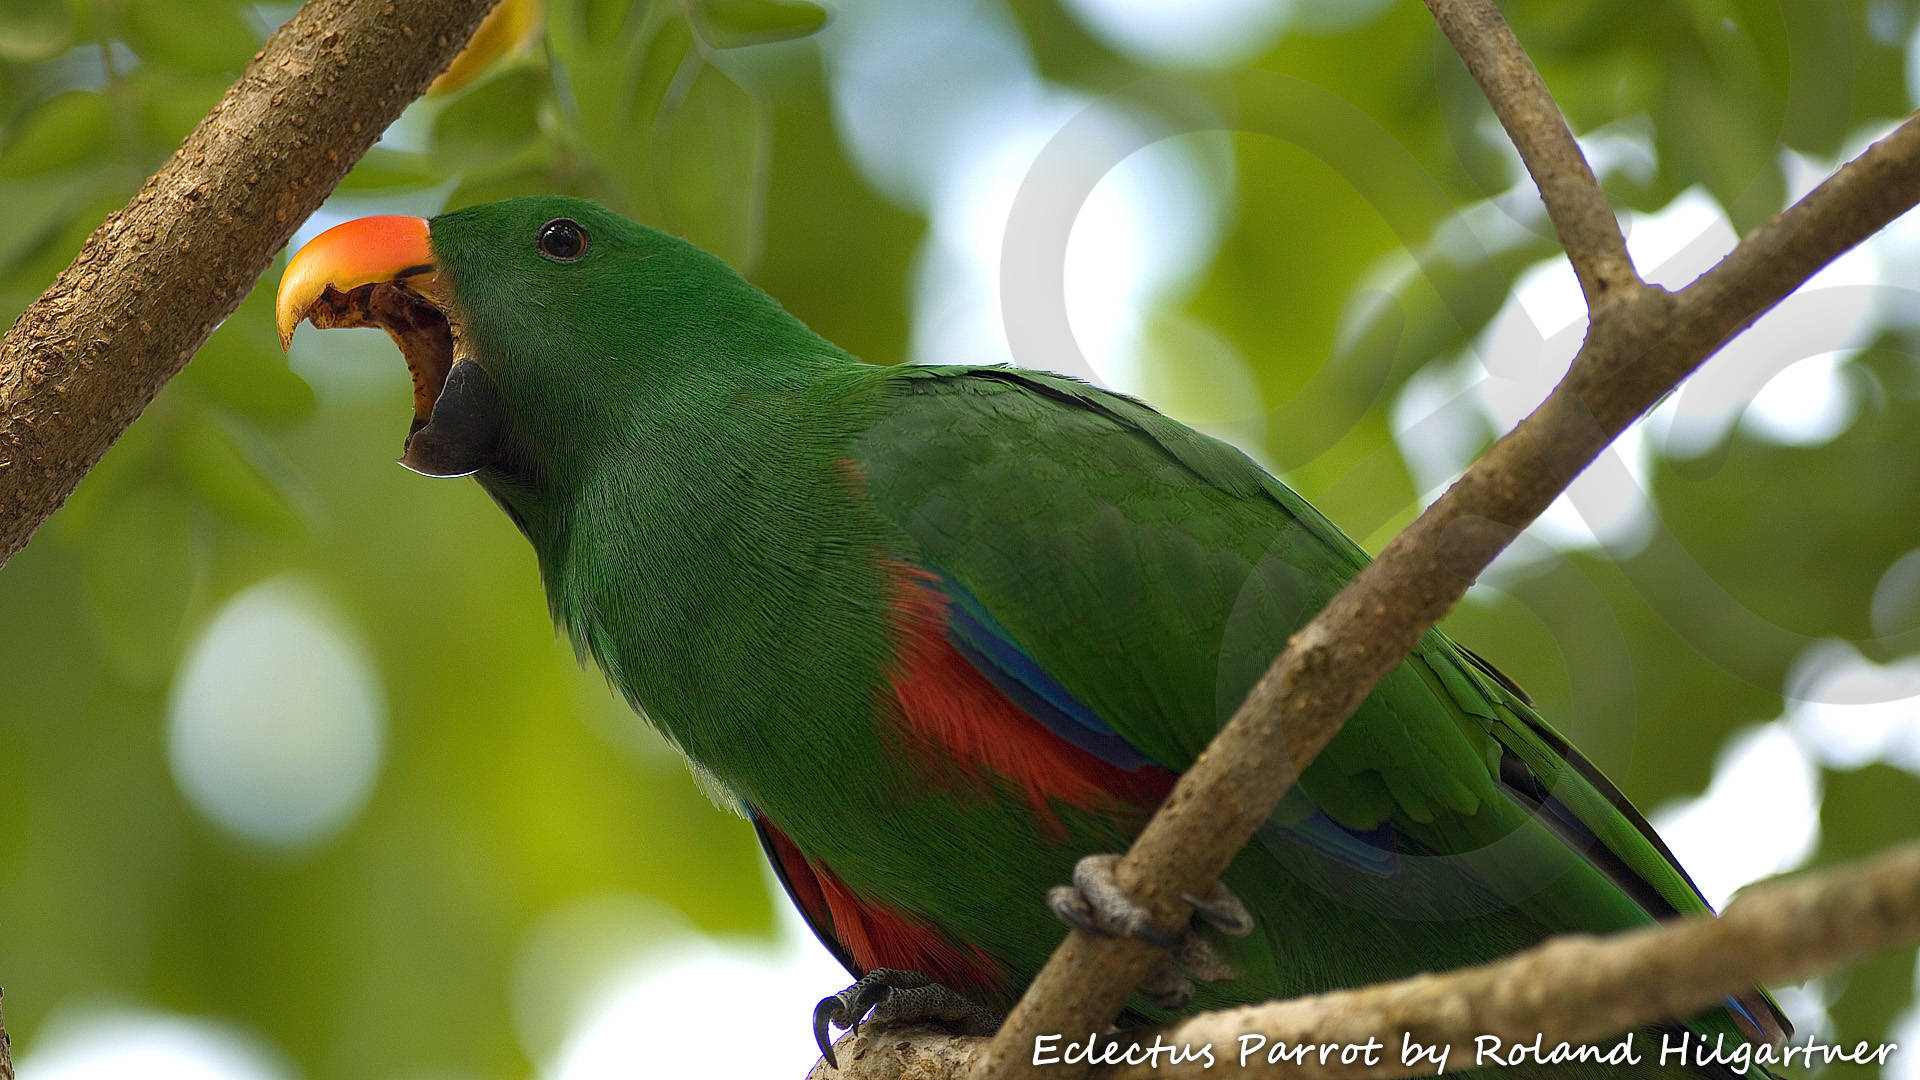 Papuan Eclectus Eclectus polychloros is widely distributed throughout the lowland forests of the New Guinea region and beyond. Copyright © Roland Hilgartner